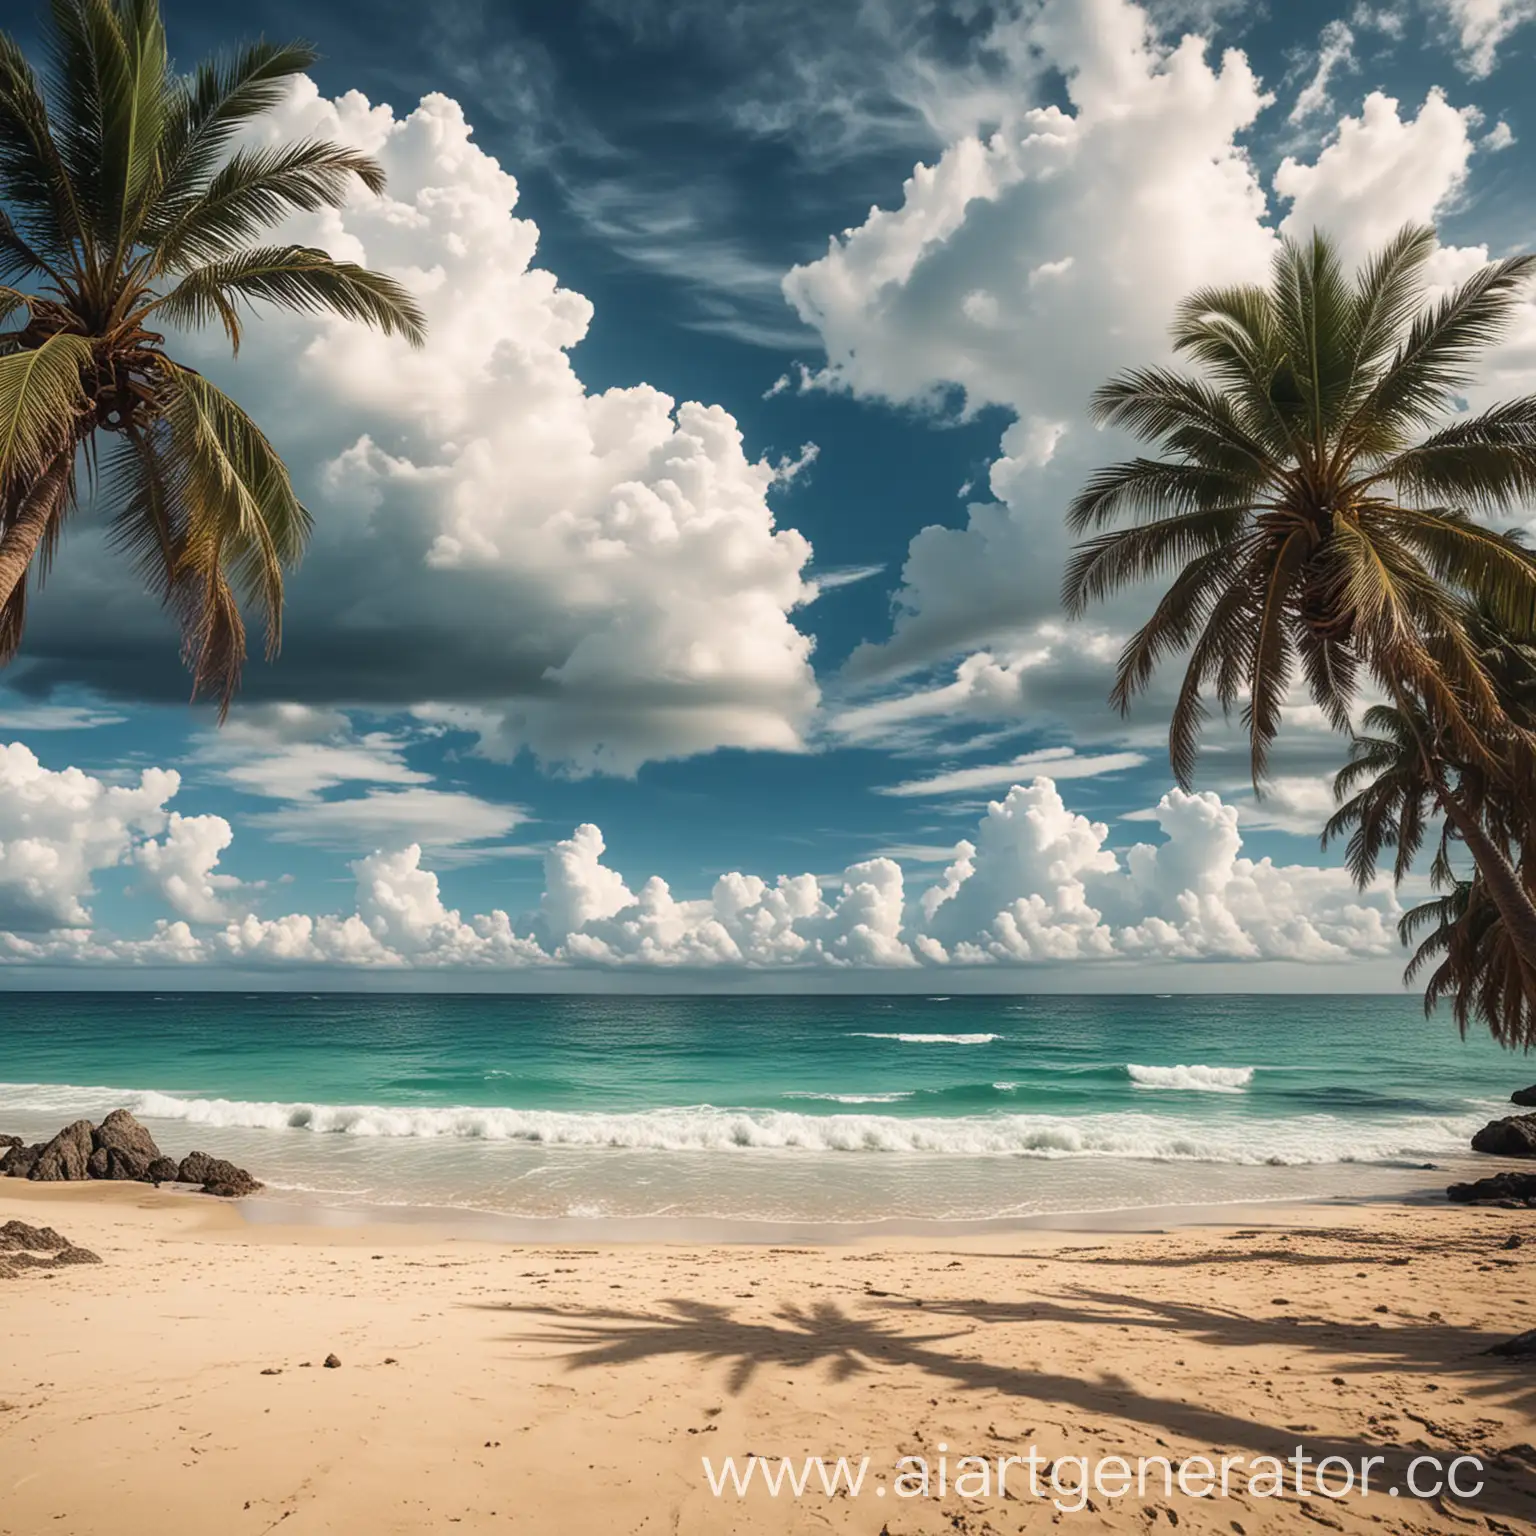 Scenic-View-of-Palm-Trees-and-Beach-Under-Cloudy-Sky